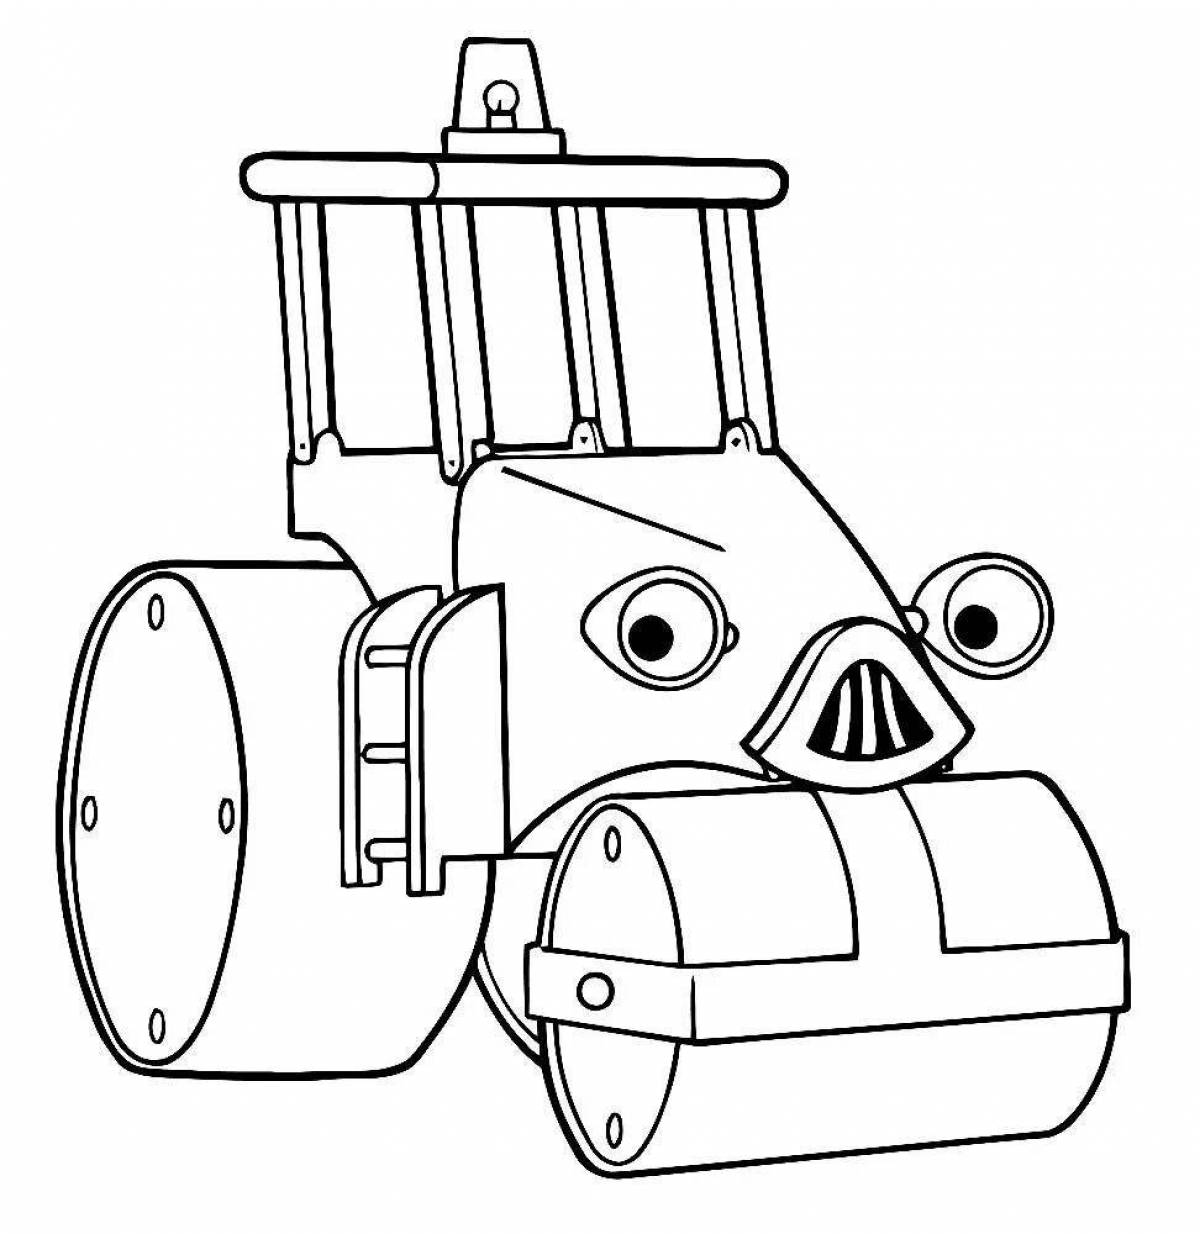 Outstanding bulldozer coloring book for kids